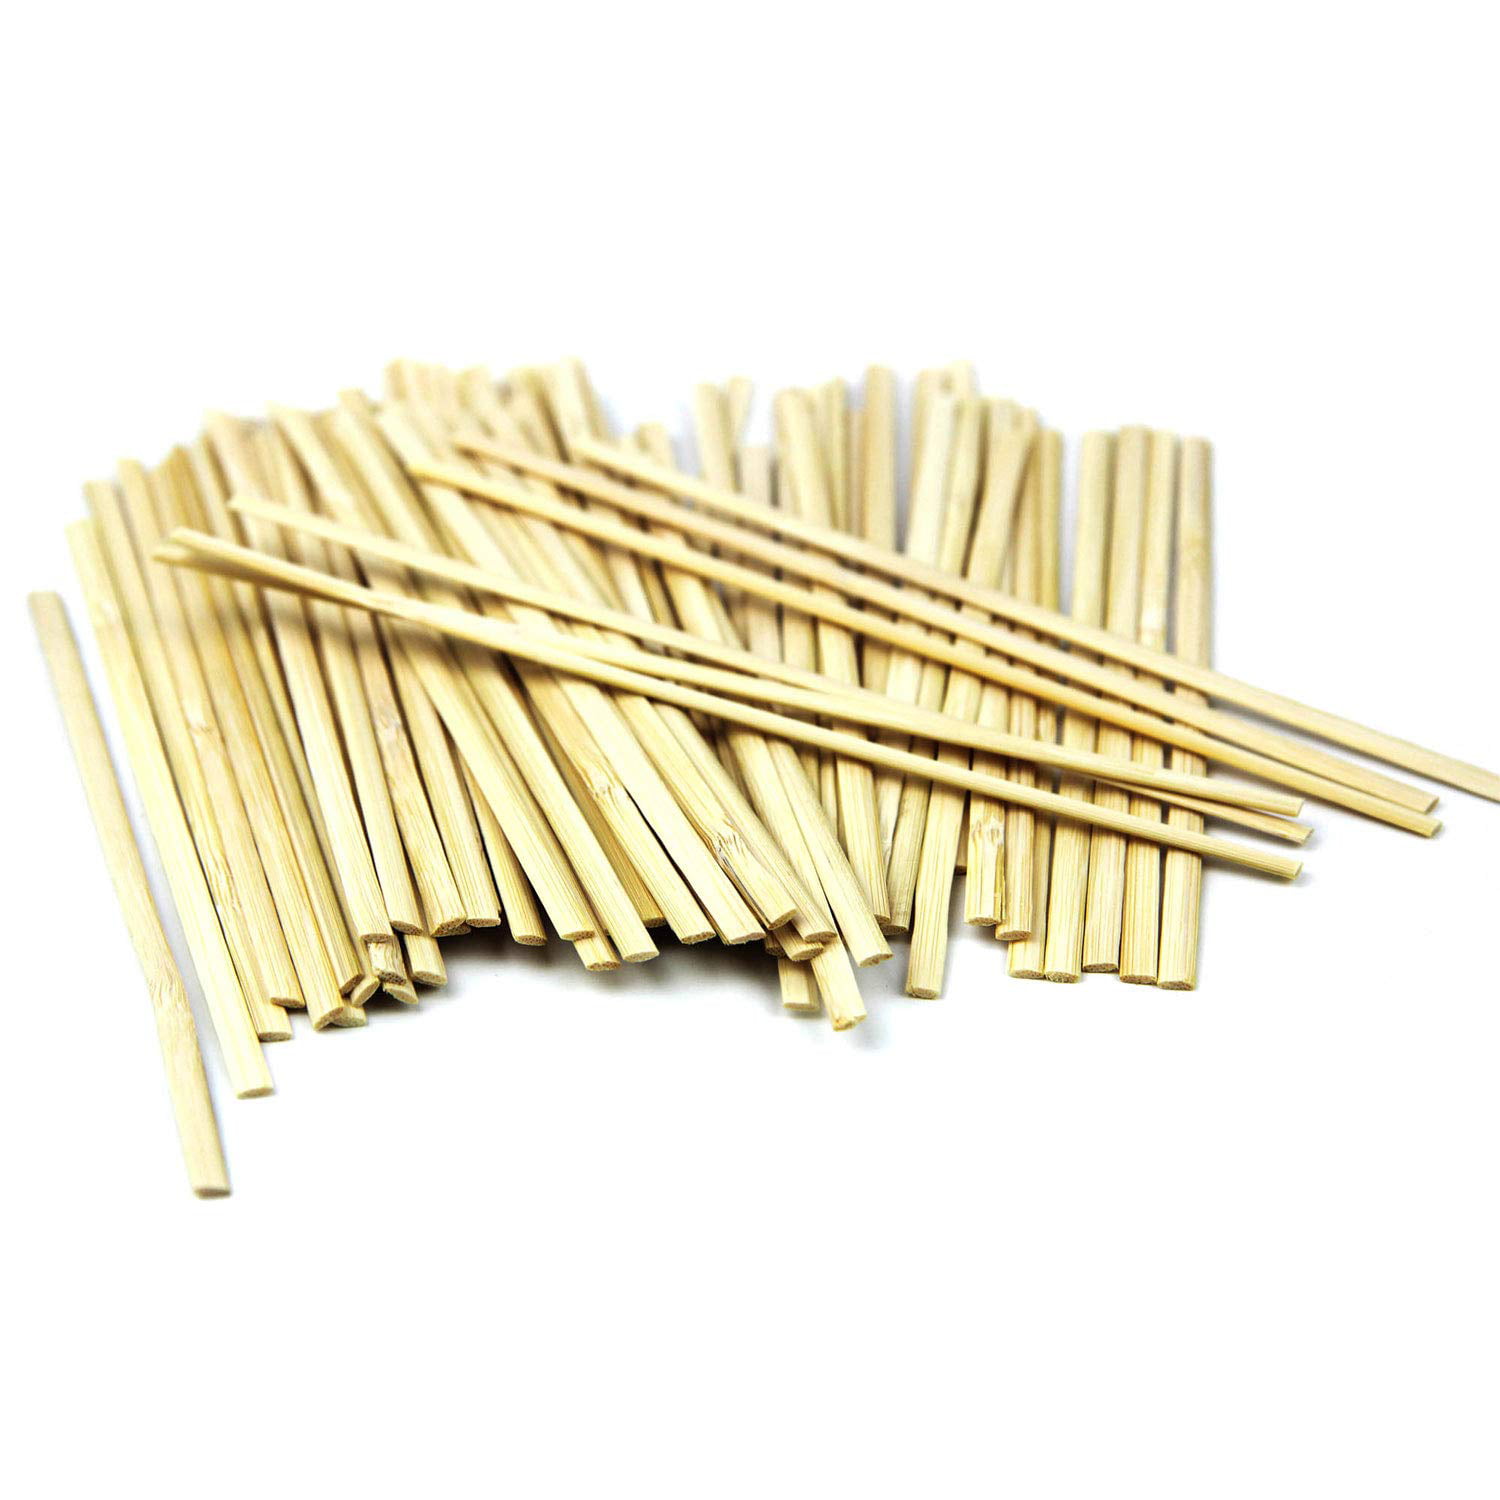 Details about   1000 X Bamboo Coffee/Tea Stirrer Sticks 5.5 inches with Square End Brown 